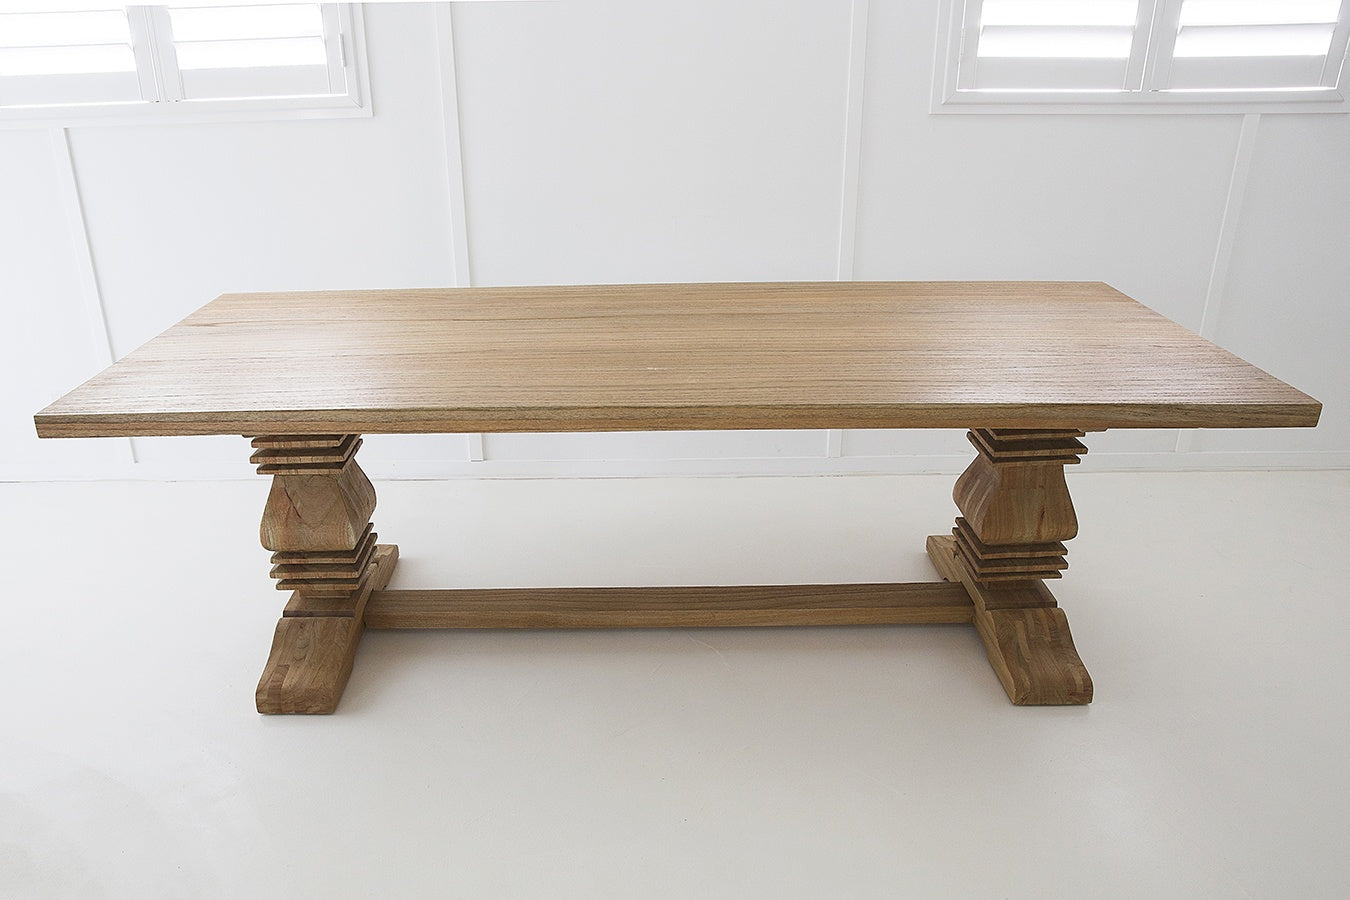 Clearwater Pedestal Table - 240cm